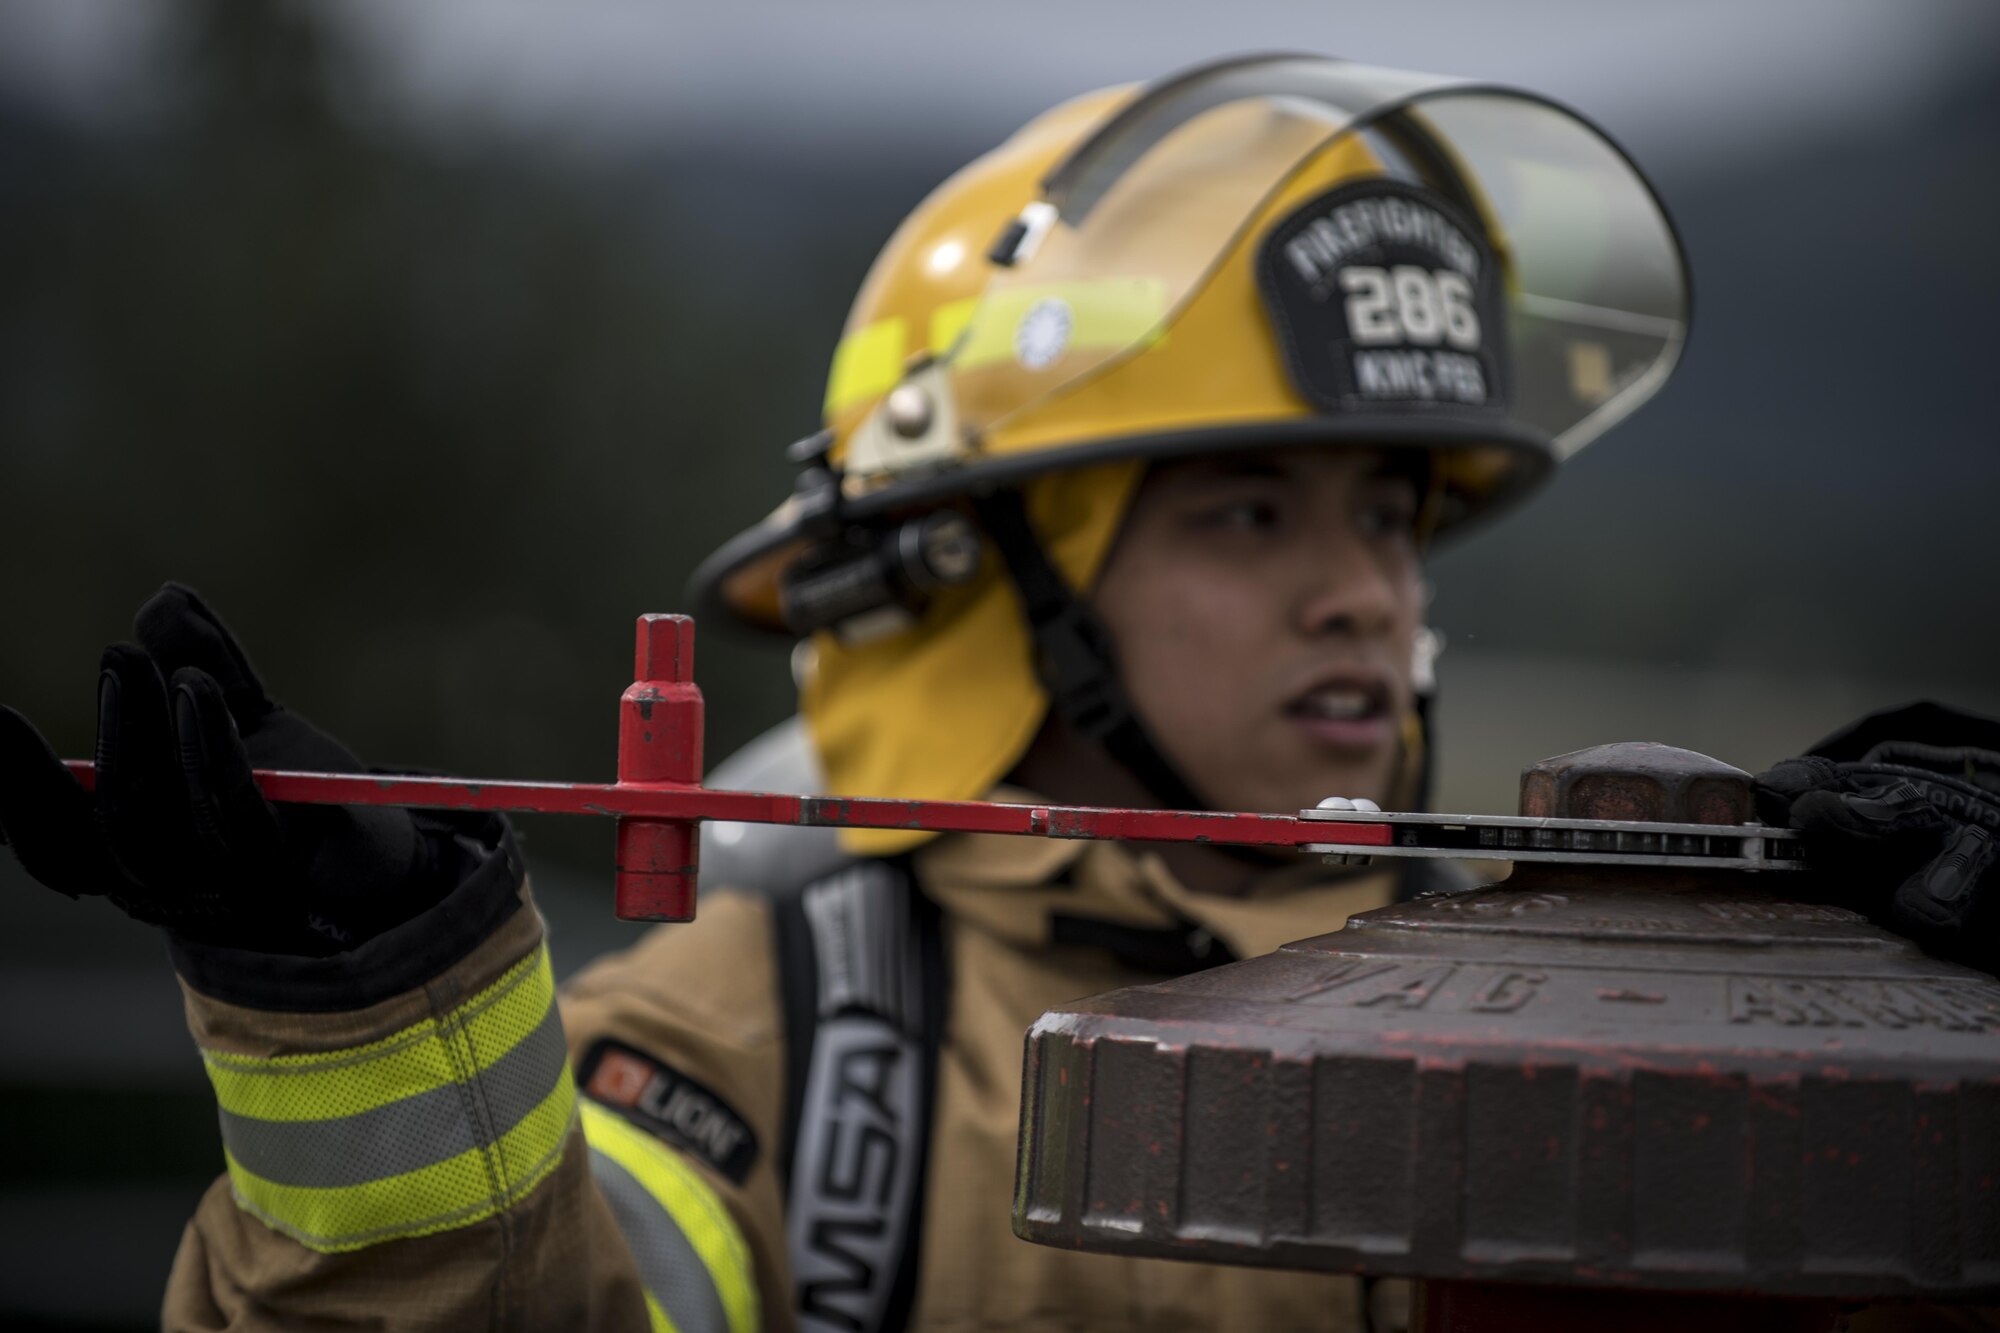 U.S. Air Force Airman 1st Class Elijah Molina, 86th Civil Engineer Squadron firefighter, operates a hydrant for re-servicing operations during annual aircraft live fire training at the 86th Civil Engineer Squadron Fire and Emergency Services Training Area on Ramstein Air Base, Germany, Sept. 14, 2017.